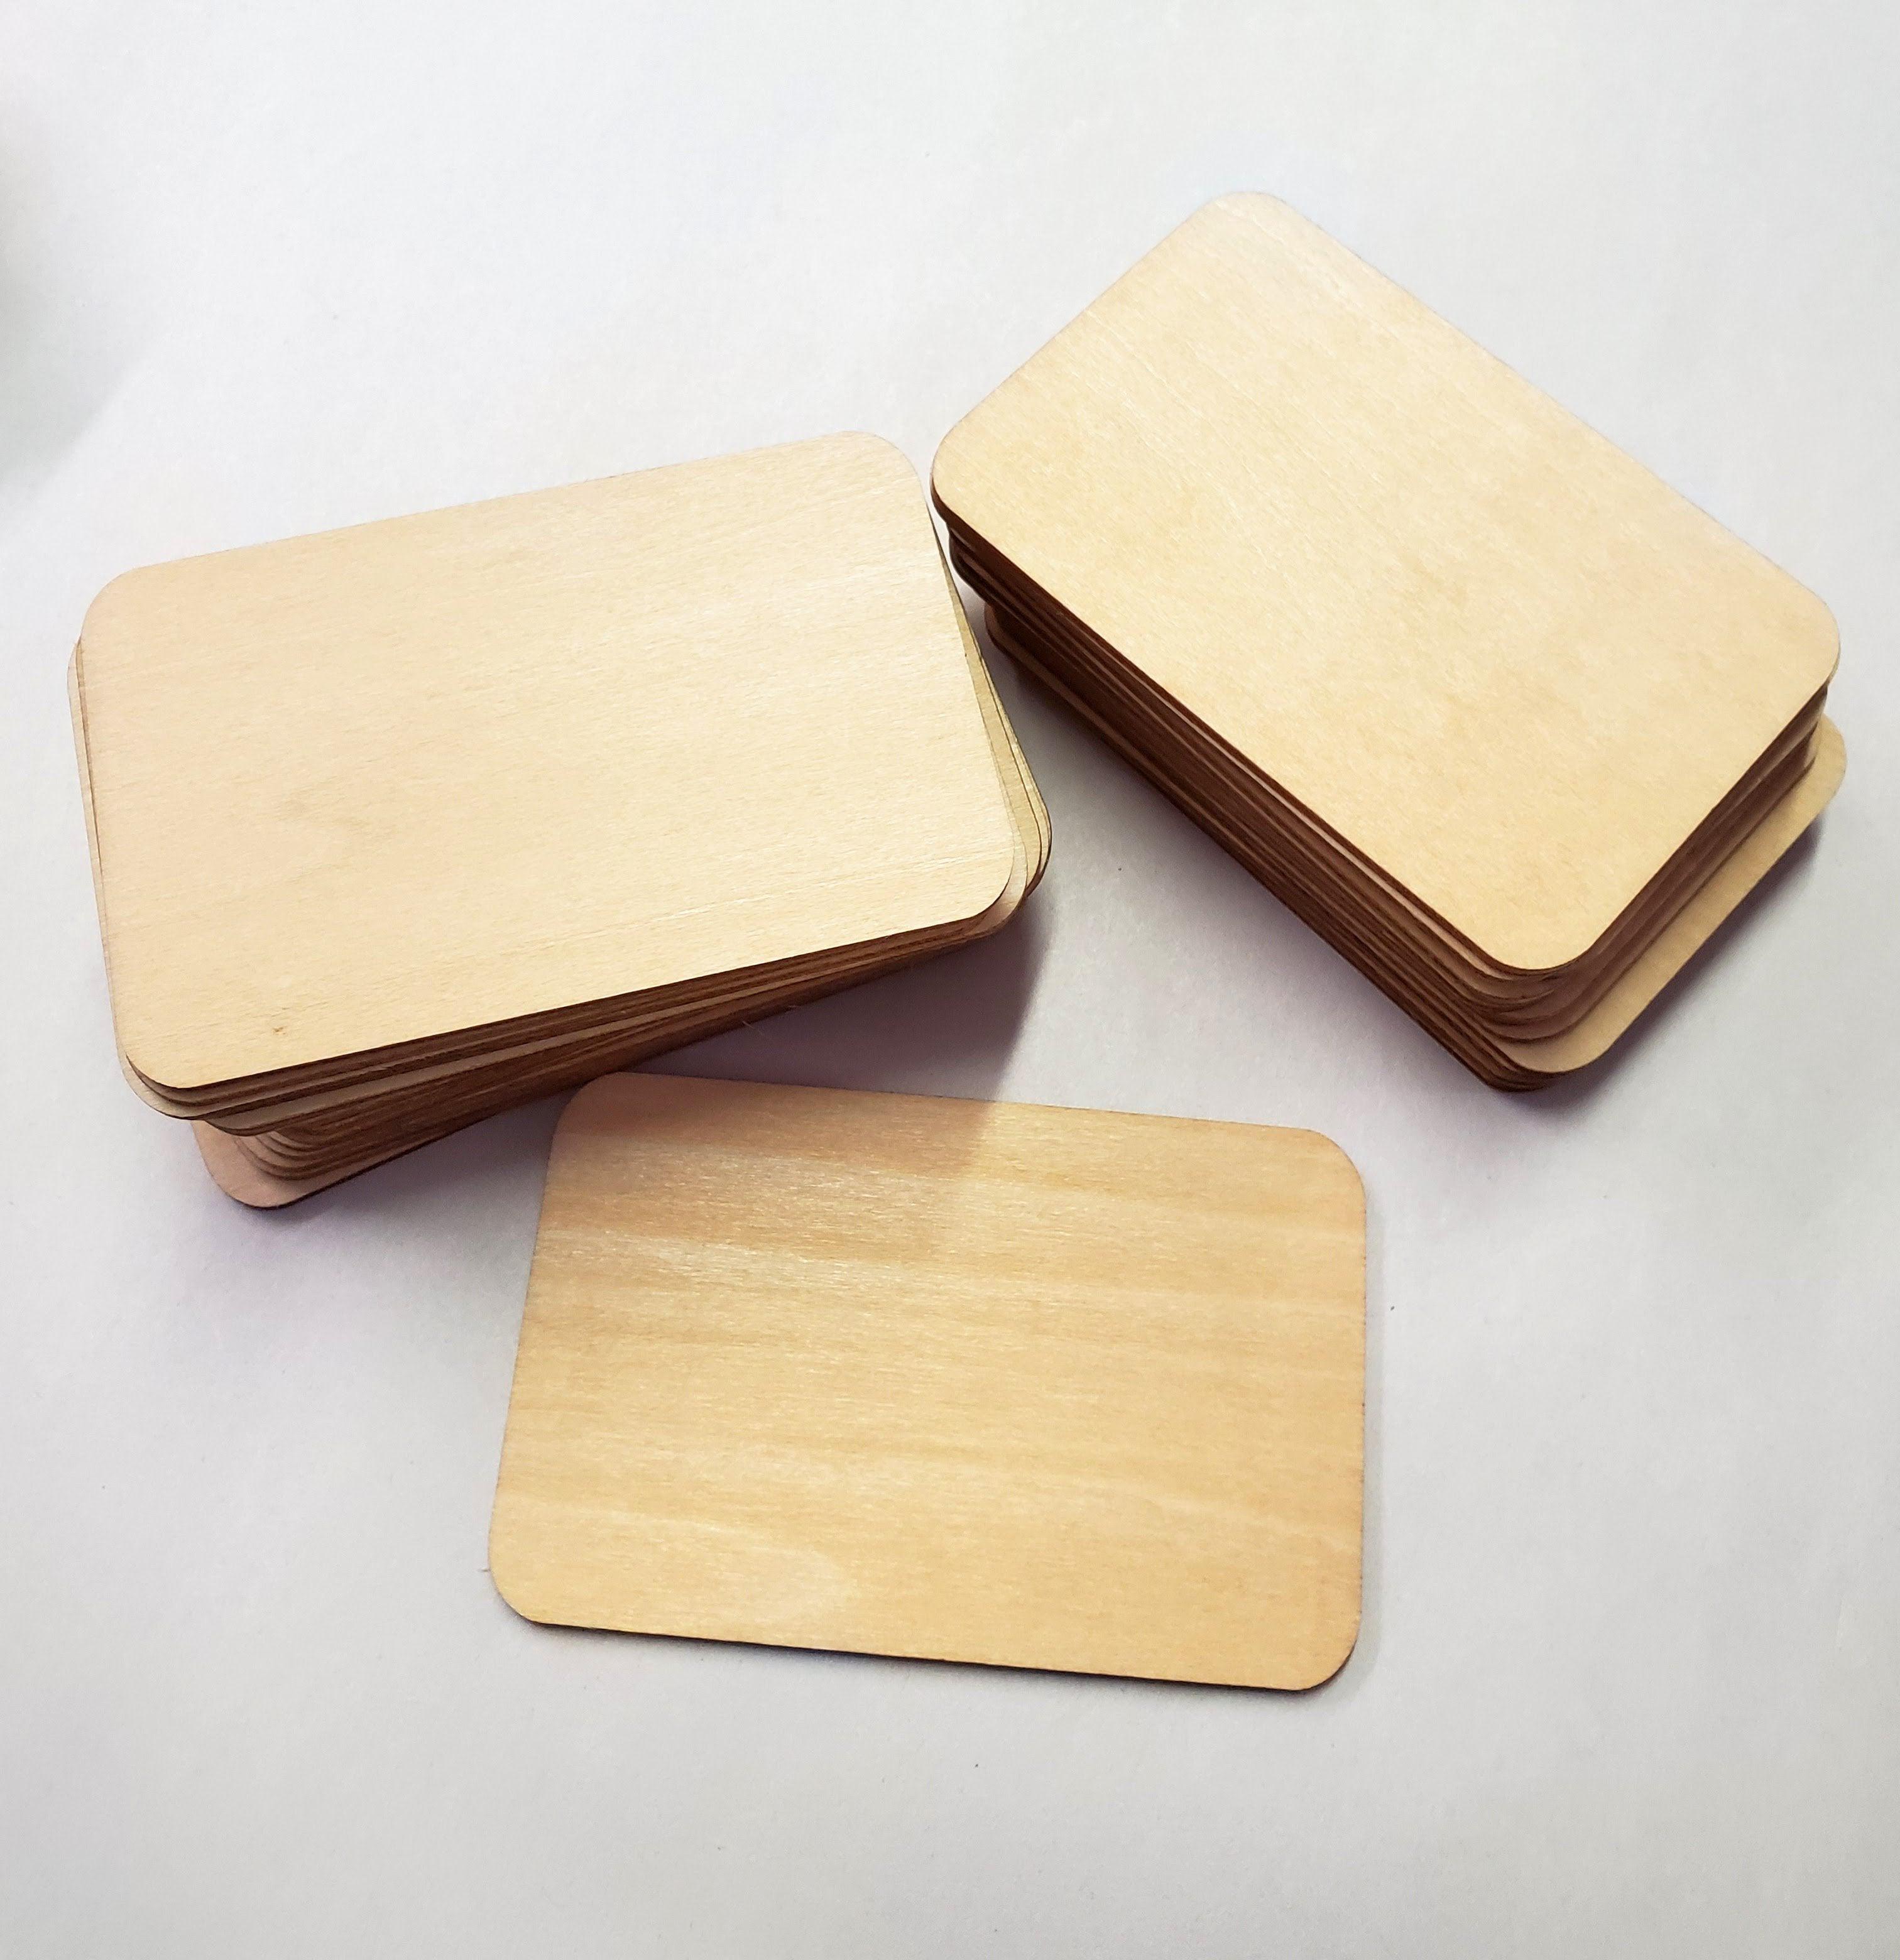 30pcs Wooden Business Card Rectangle with rounded corners-Design Blanks